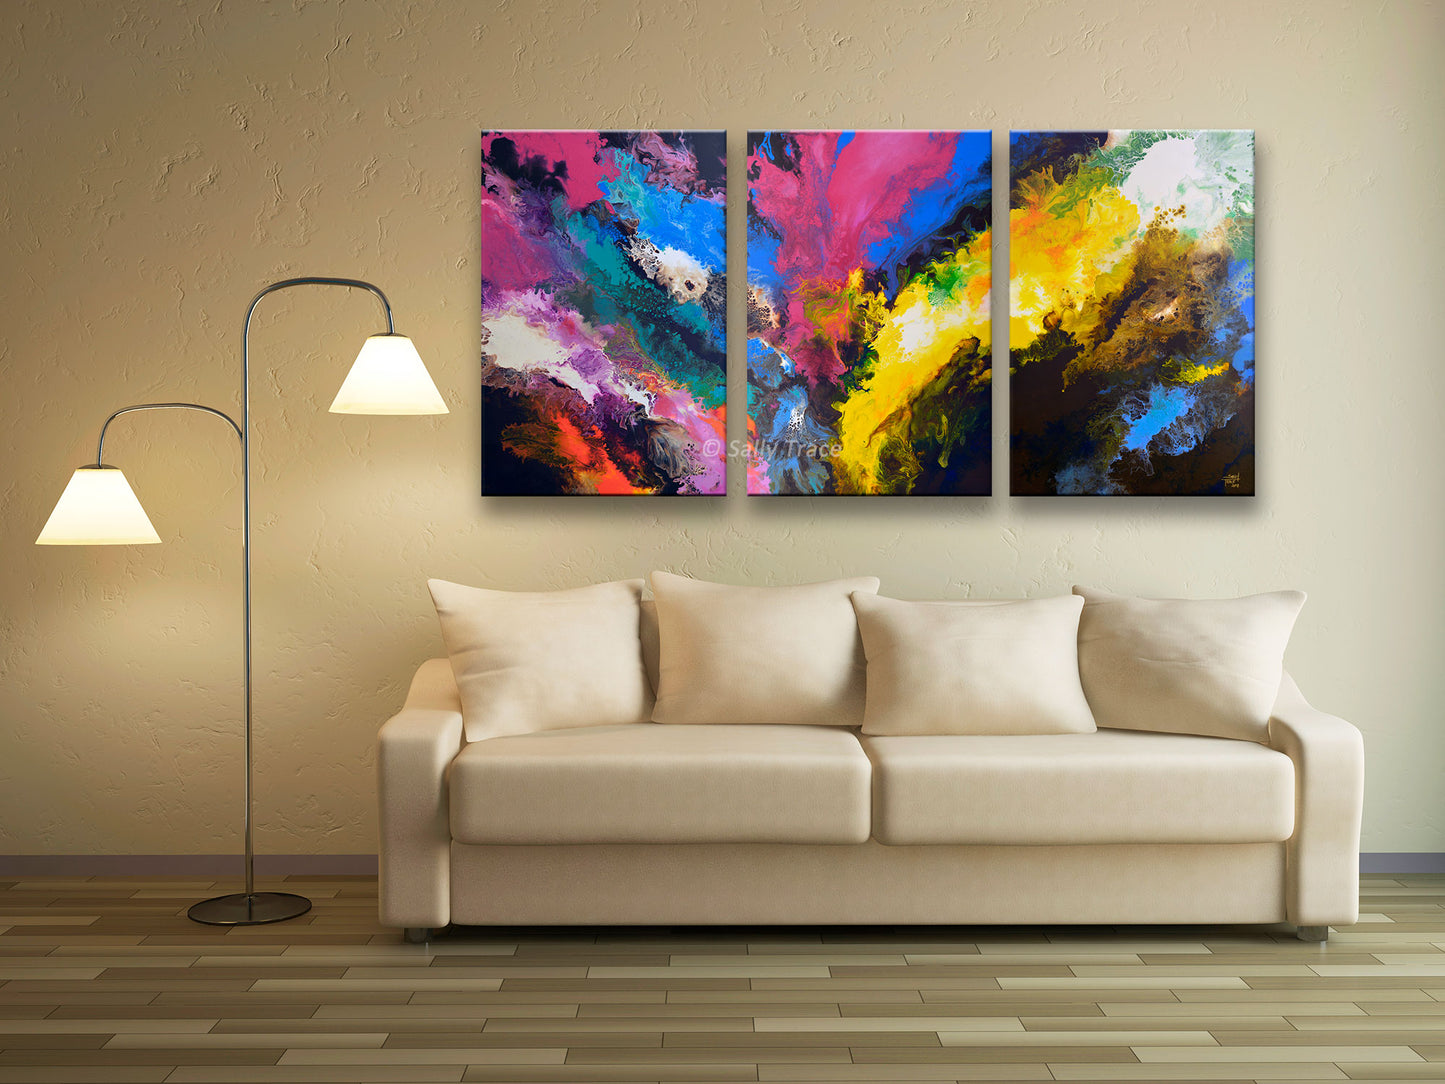 Ulysses 5, giclee prints on canvas from the original triptych fluid abstract painting by Sally Trace